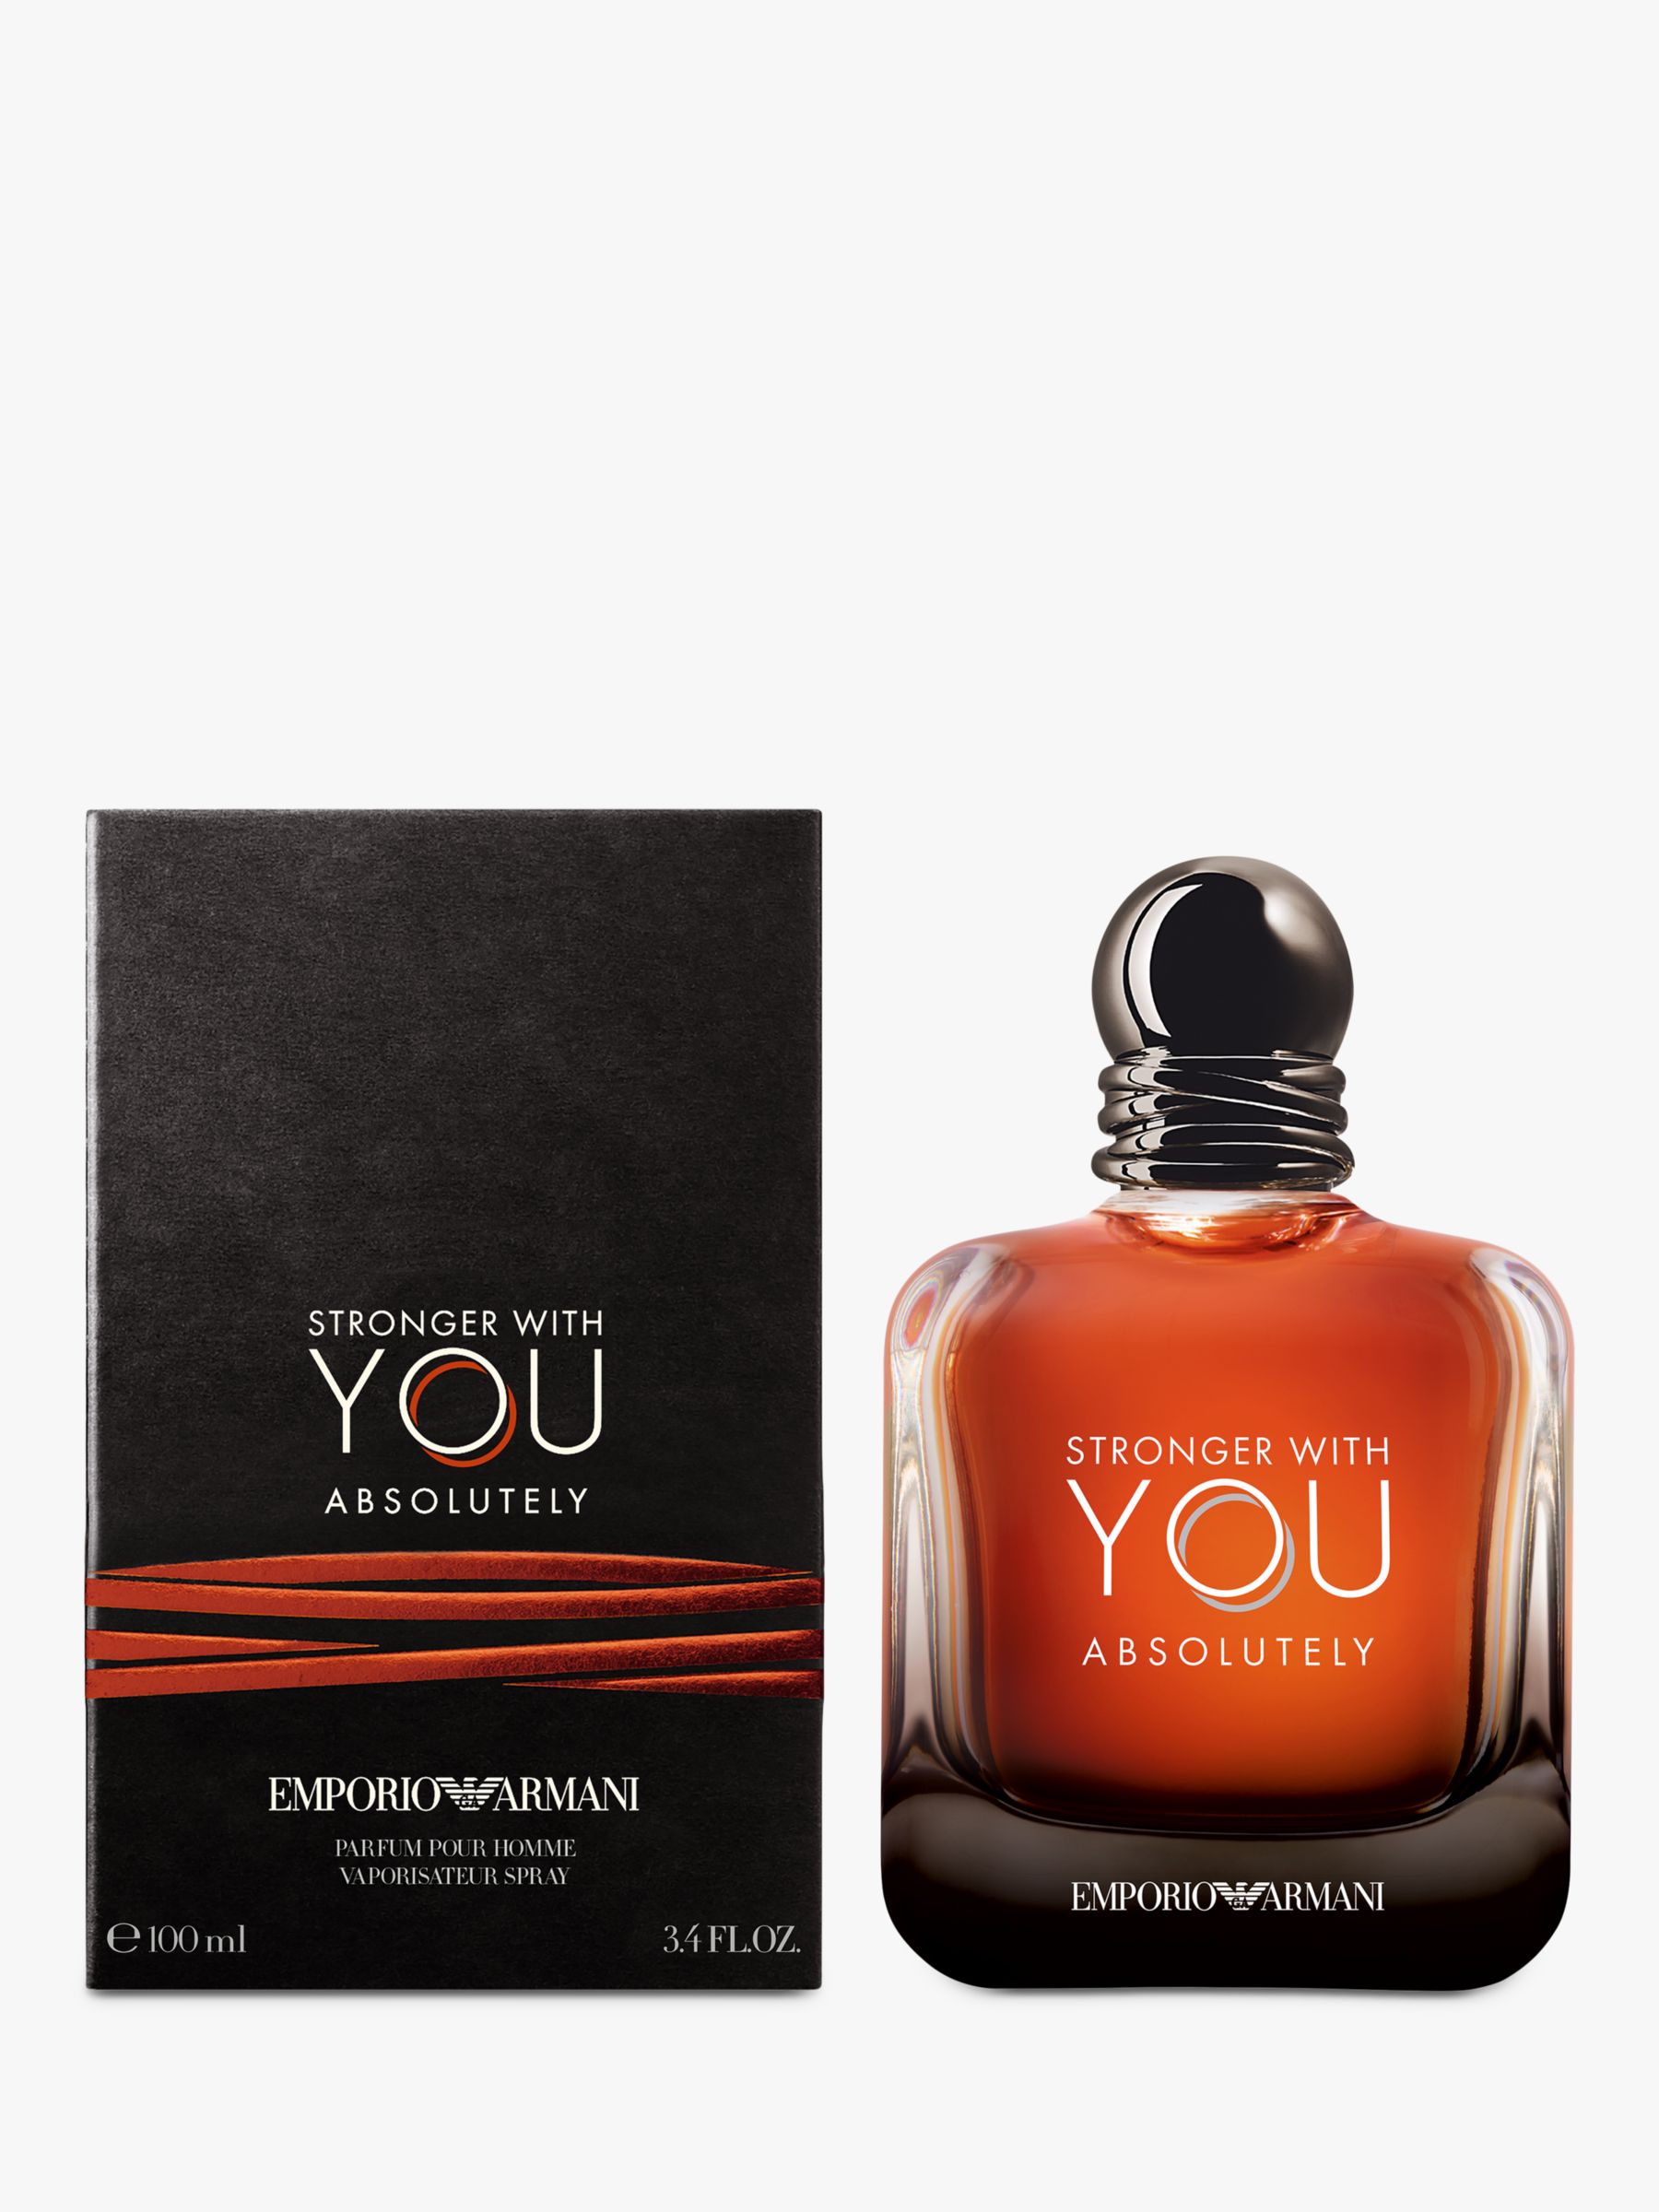 Emporio Armani Stronger With You Absolutely Parfum, 100ml 6